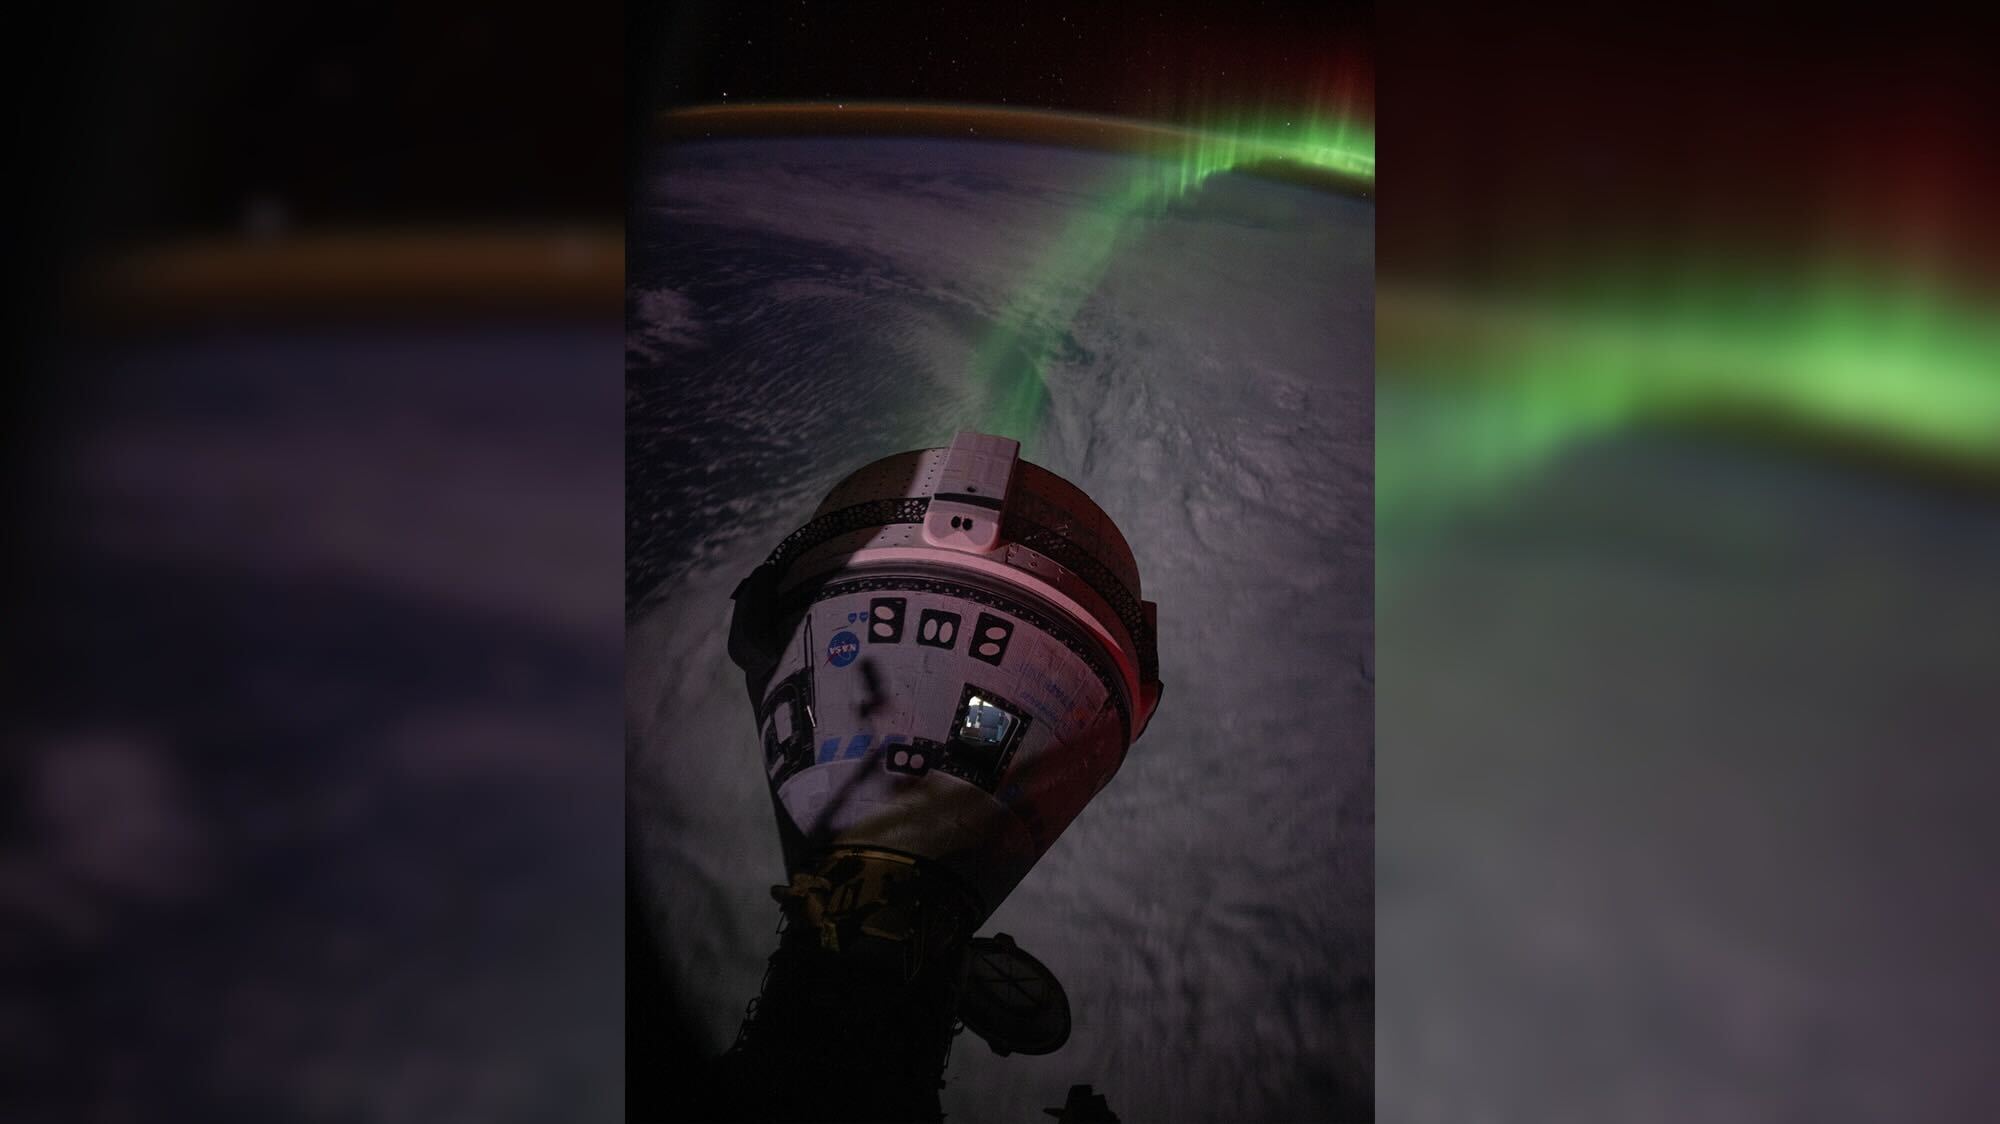  Shine on, Starliner! Aurora glows green as astronauts test spacecraft ahead of return to Earth June 22 (image, video) 